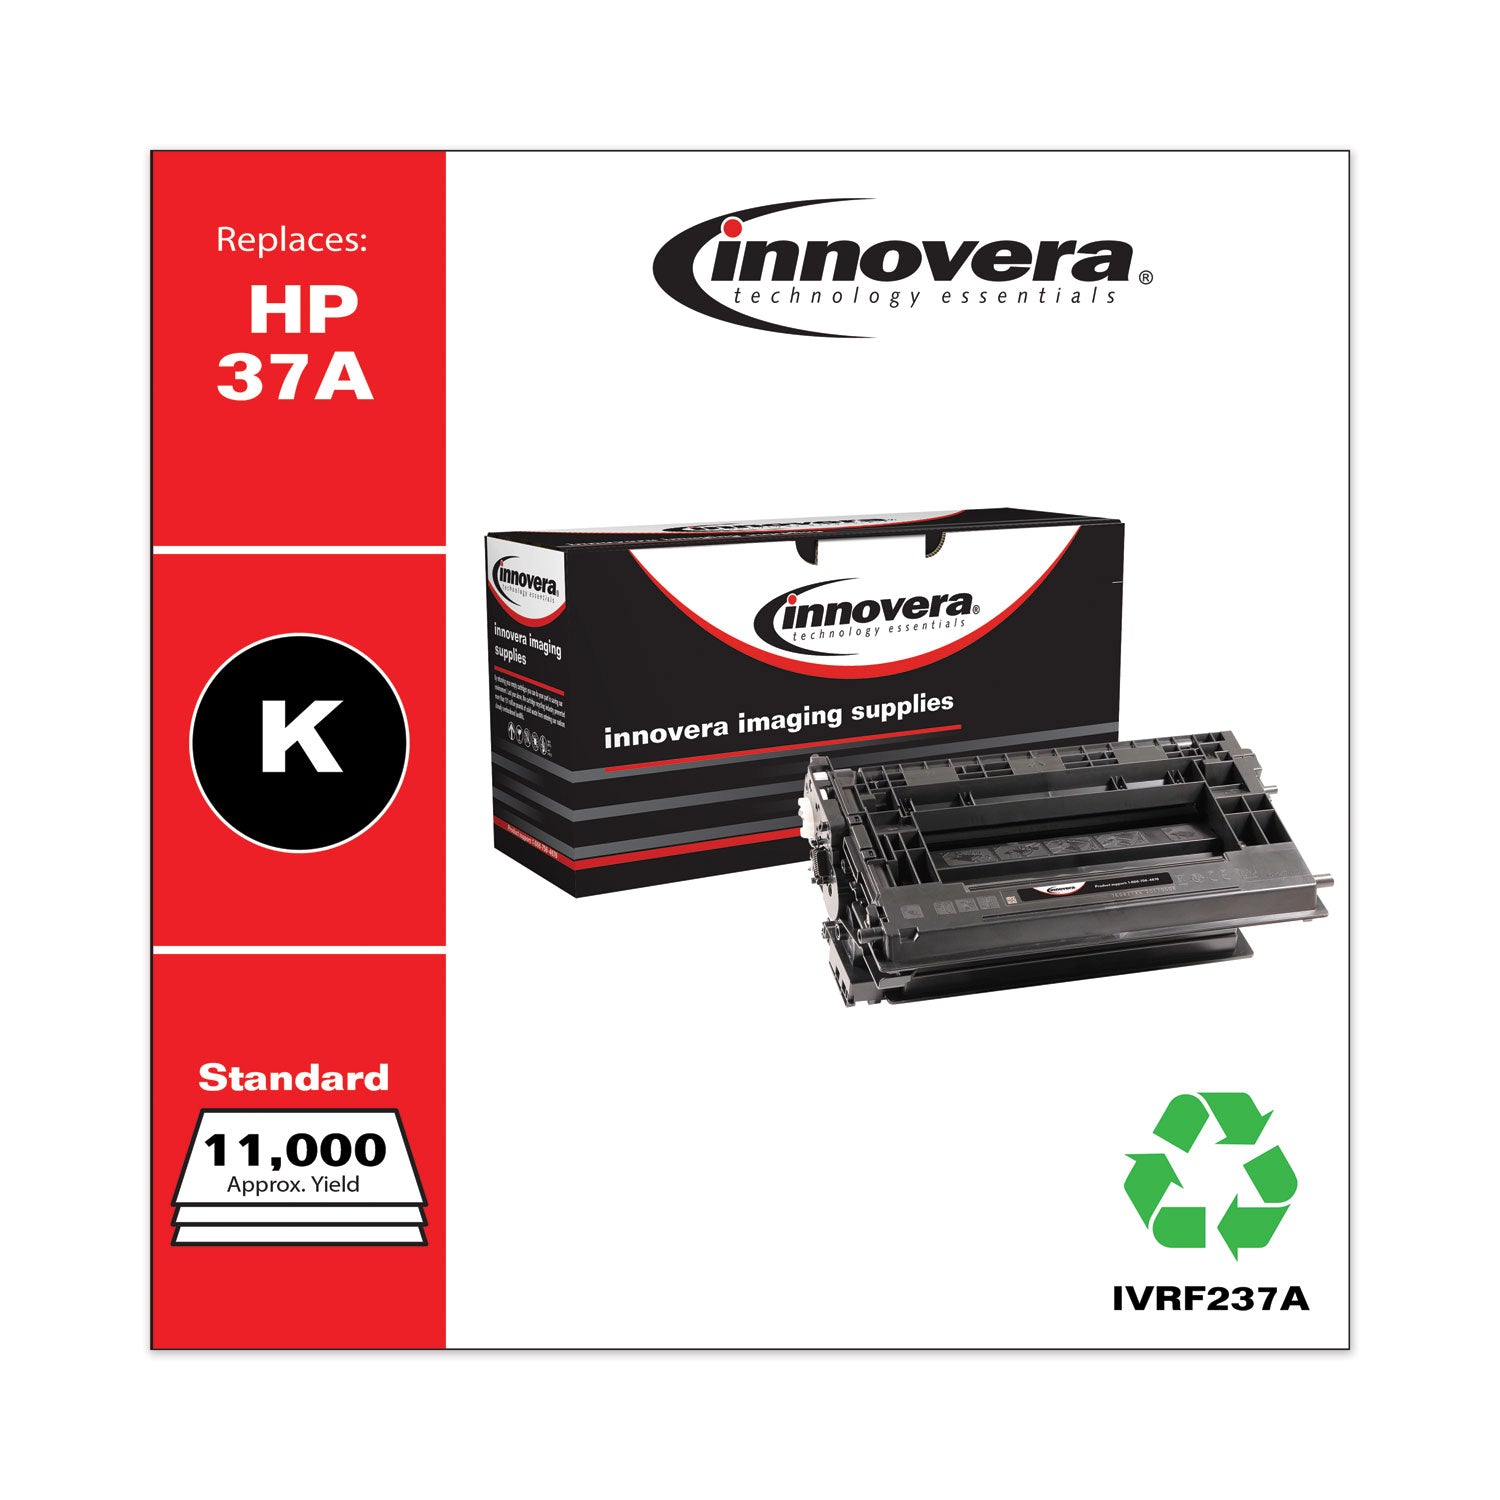 remanufactured-black-toner-replacement-for-37a-cf237a-11000-page-yield_ivrf237a - 2